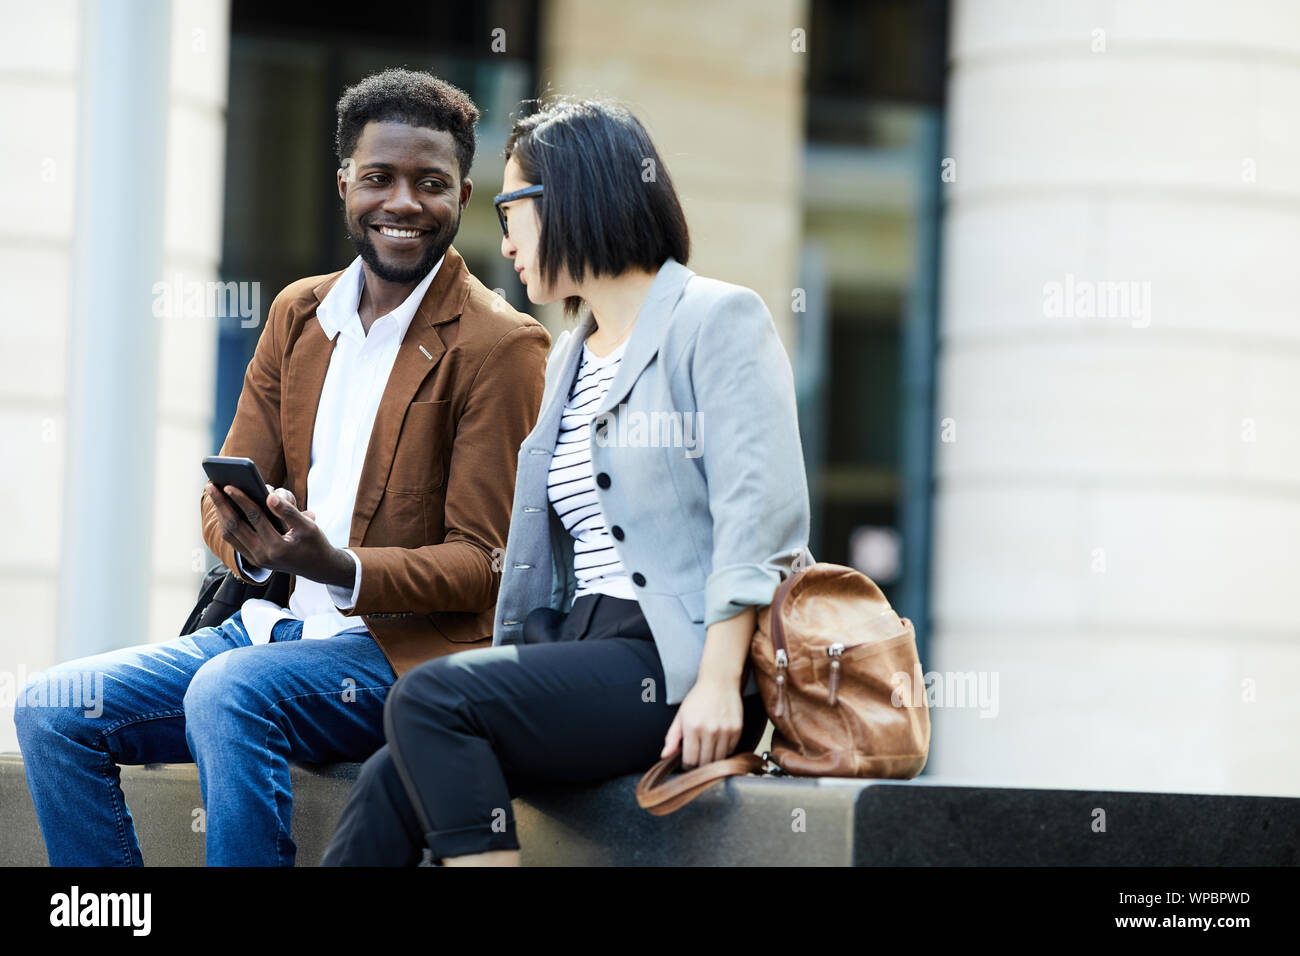 Portrait of two young business people relaxing outdoors during break, African man and Asian woman chatting happily, copy space Stock Photo